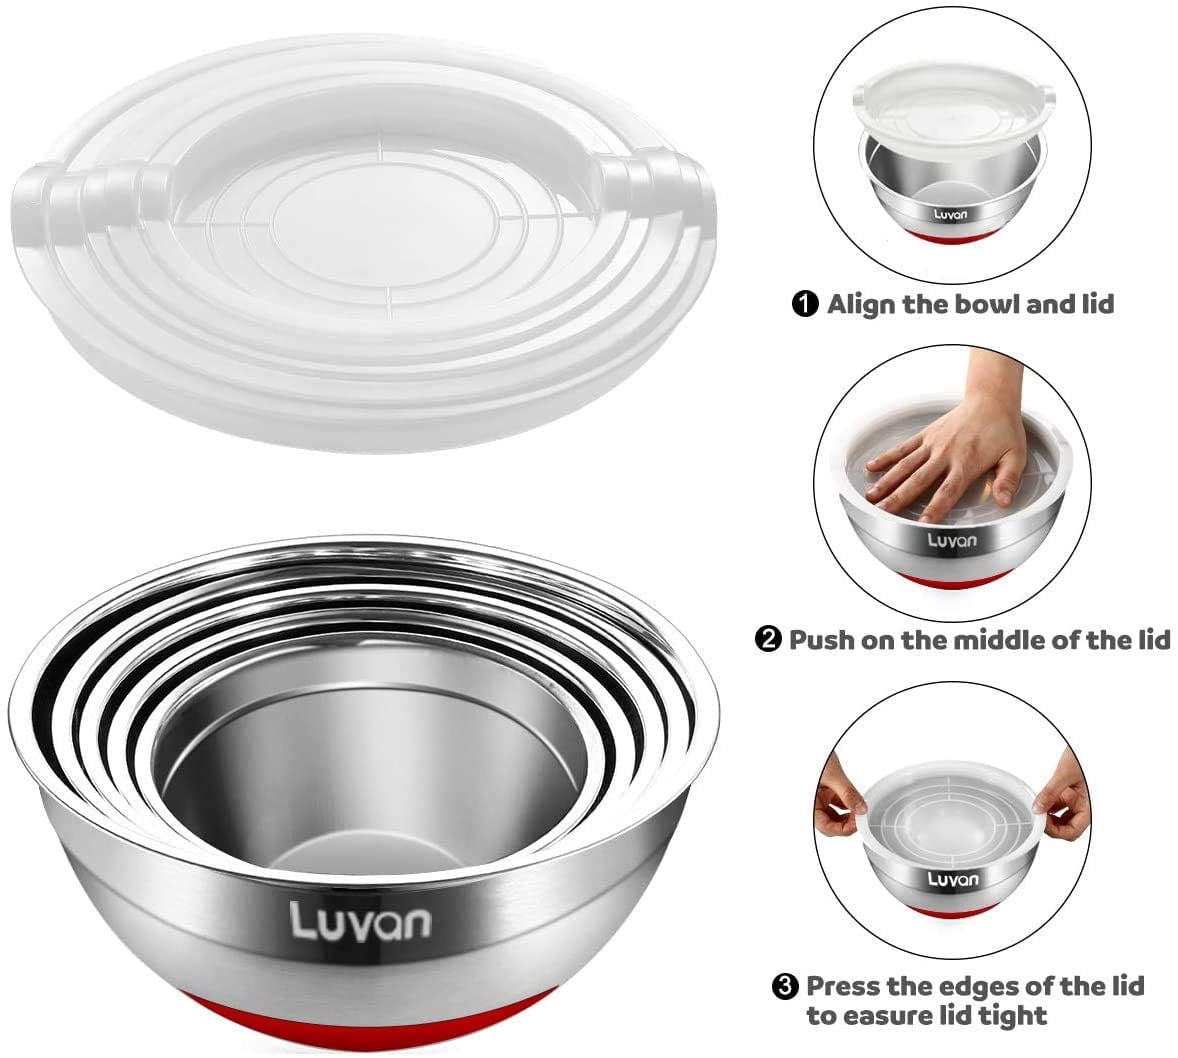 Luvan 304 Stainless Steel Mixing Bowls with Lids,Wide Rim for Easy Grip and Pouring,Extra Deep for Generous Servings,Stackable for Easy Storage,FDA-Approved/&BPA-Free,Versatile in Kitchen,Set of 5